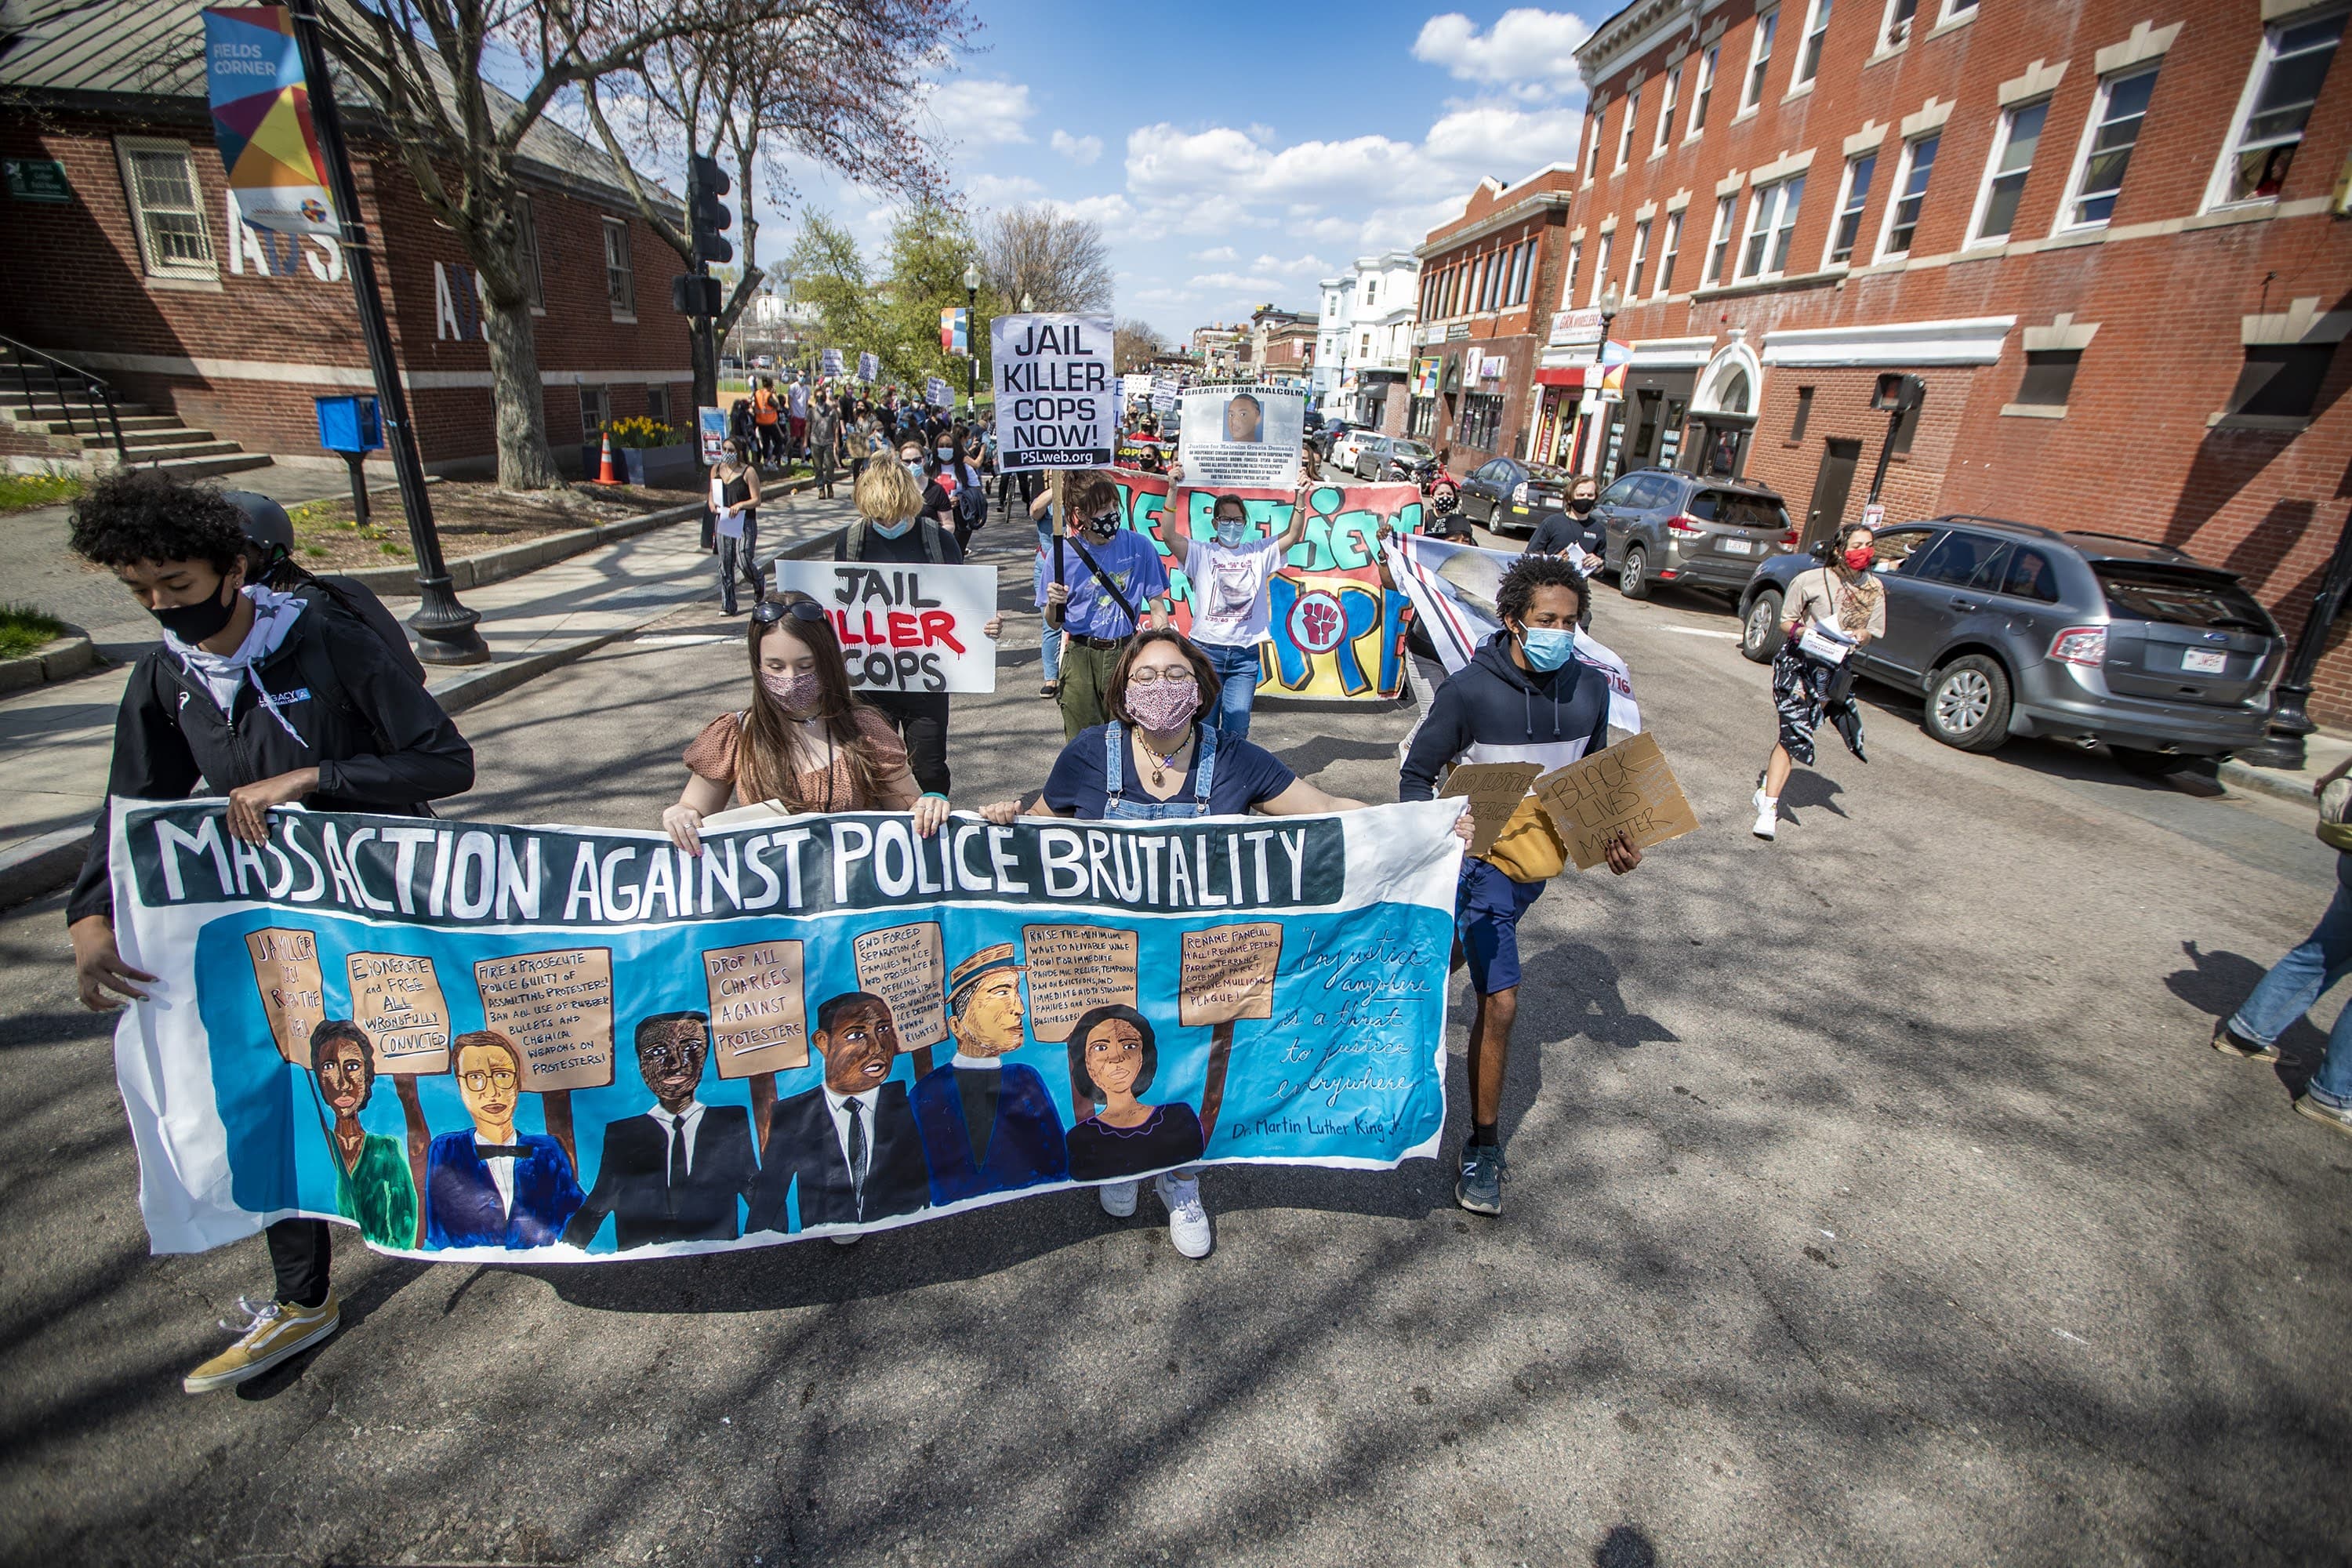 Protesters begin marching down Dorchester Avenue in Fields Corner during the Mass. Action Against Police Brutality rally and march. (Jesse Costa/WBUR)